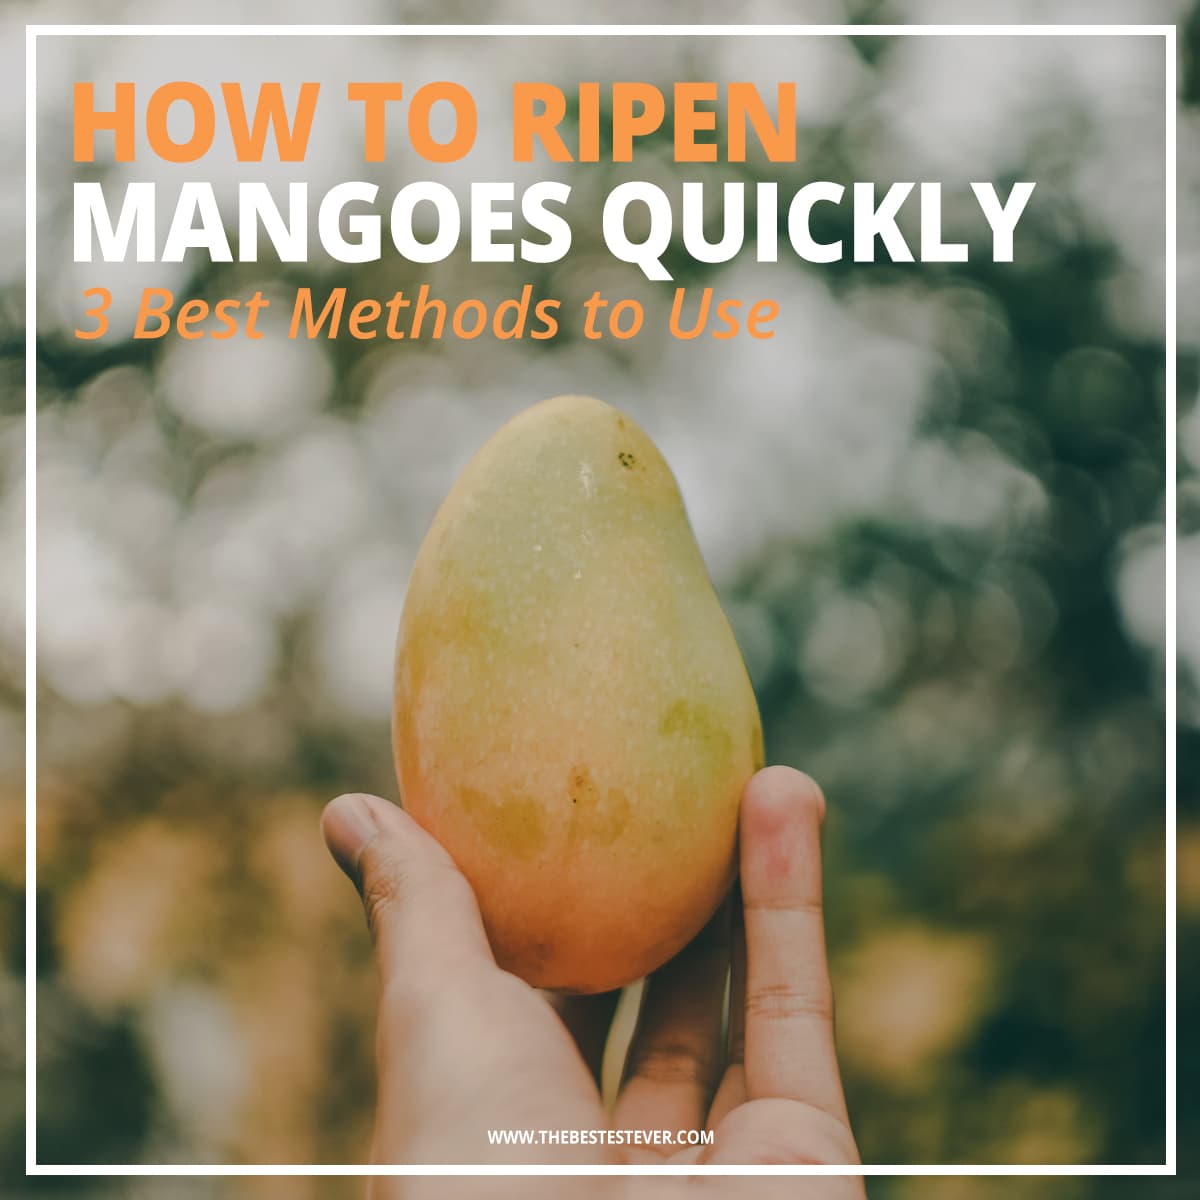 How to Ripen Mangoes Quickly: 3 Best Methods to Use